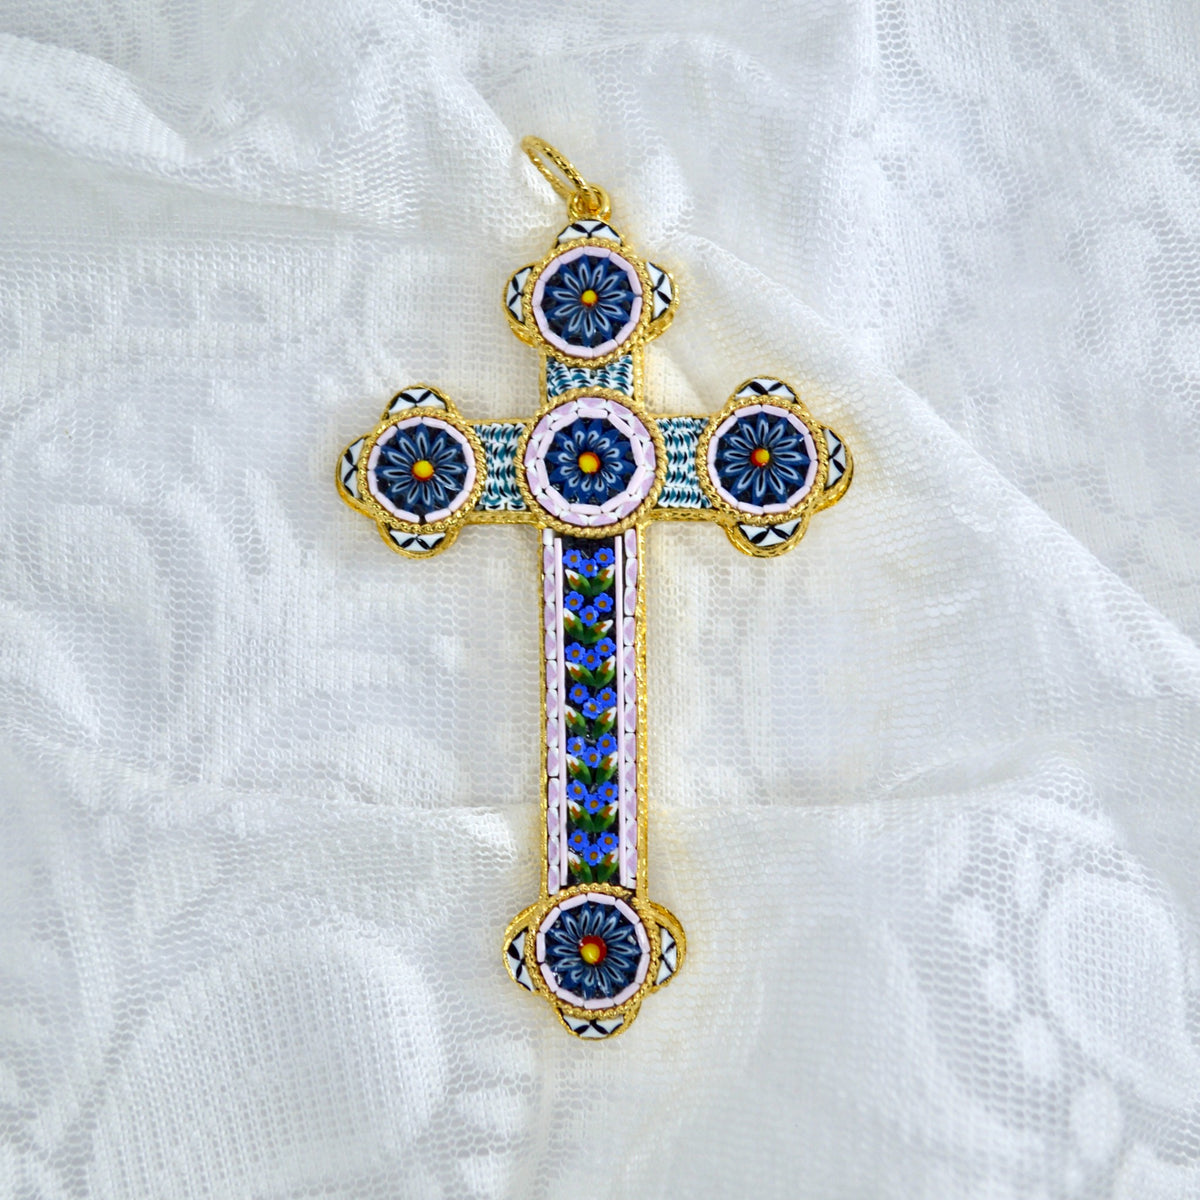 Large Florentine Glass Mosaic Cross Pendant, Crafted In Italy - My Italian Decor